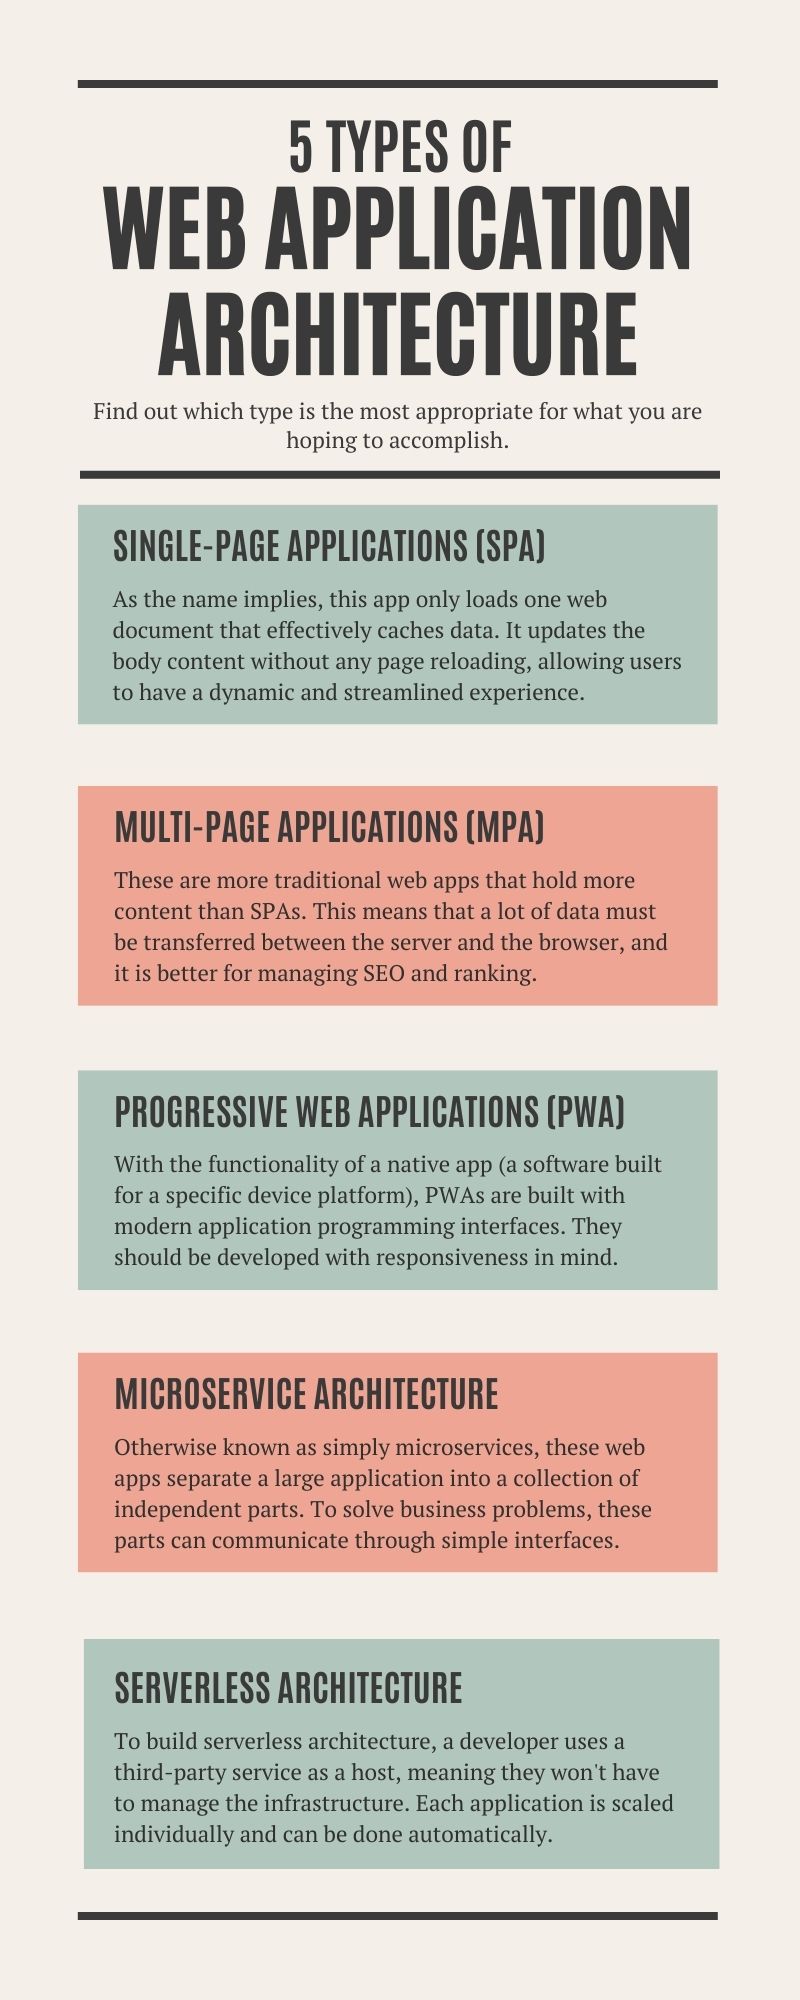 5 Types of Web Application Architecture